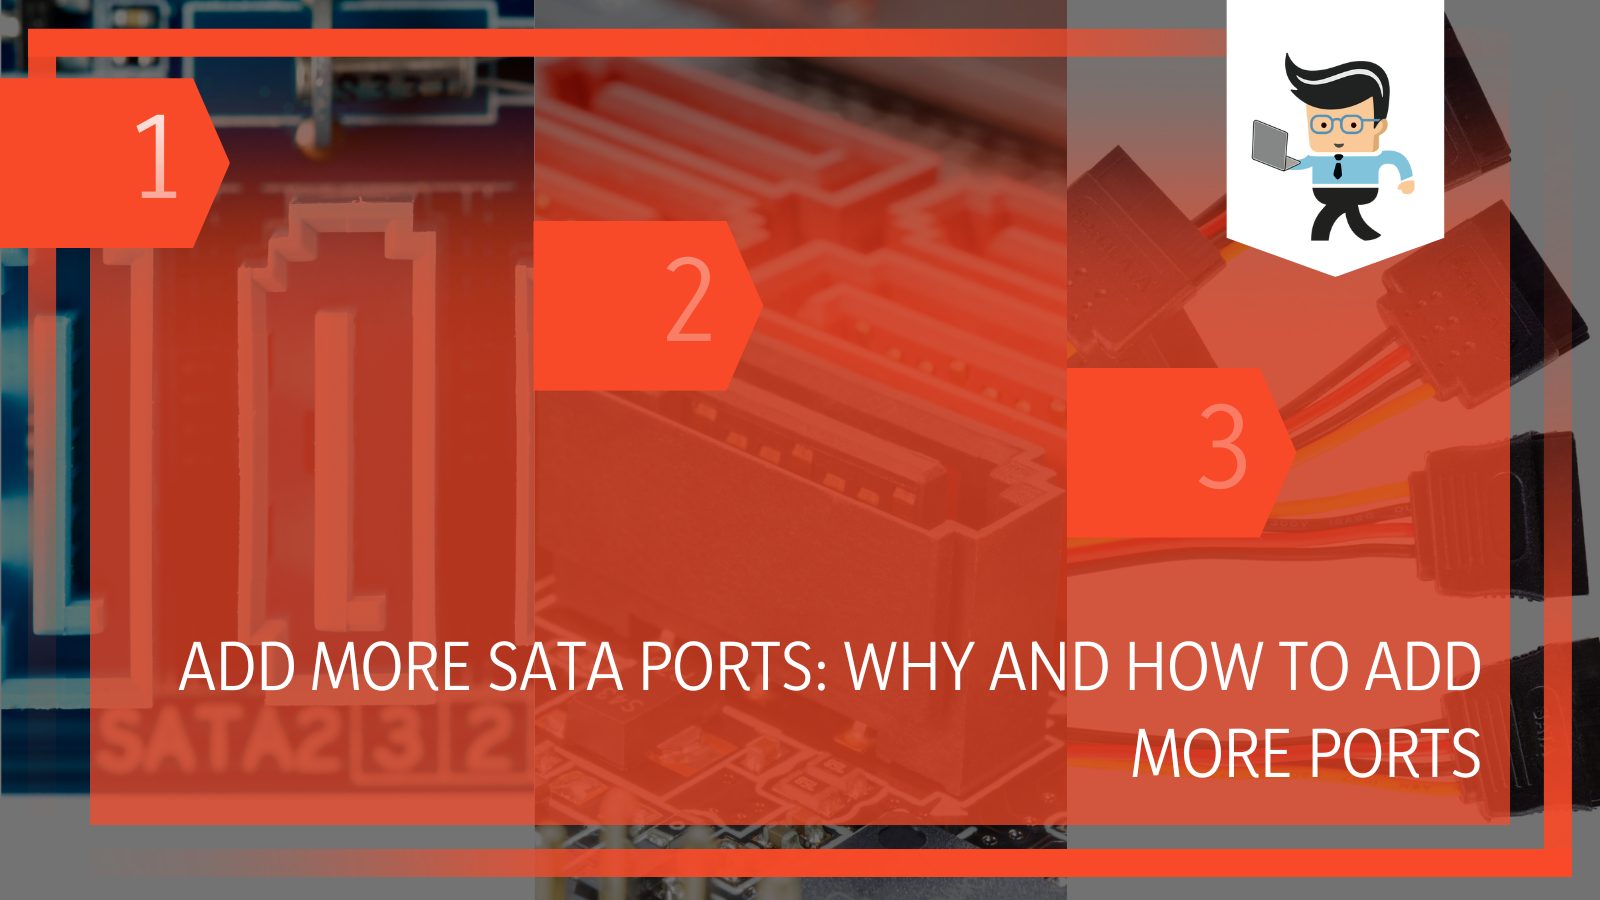 How to Add More Sata Ports